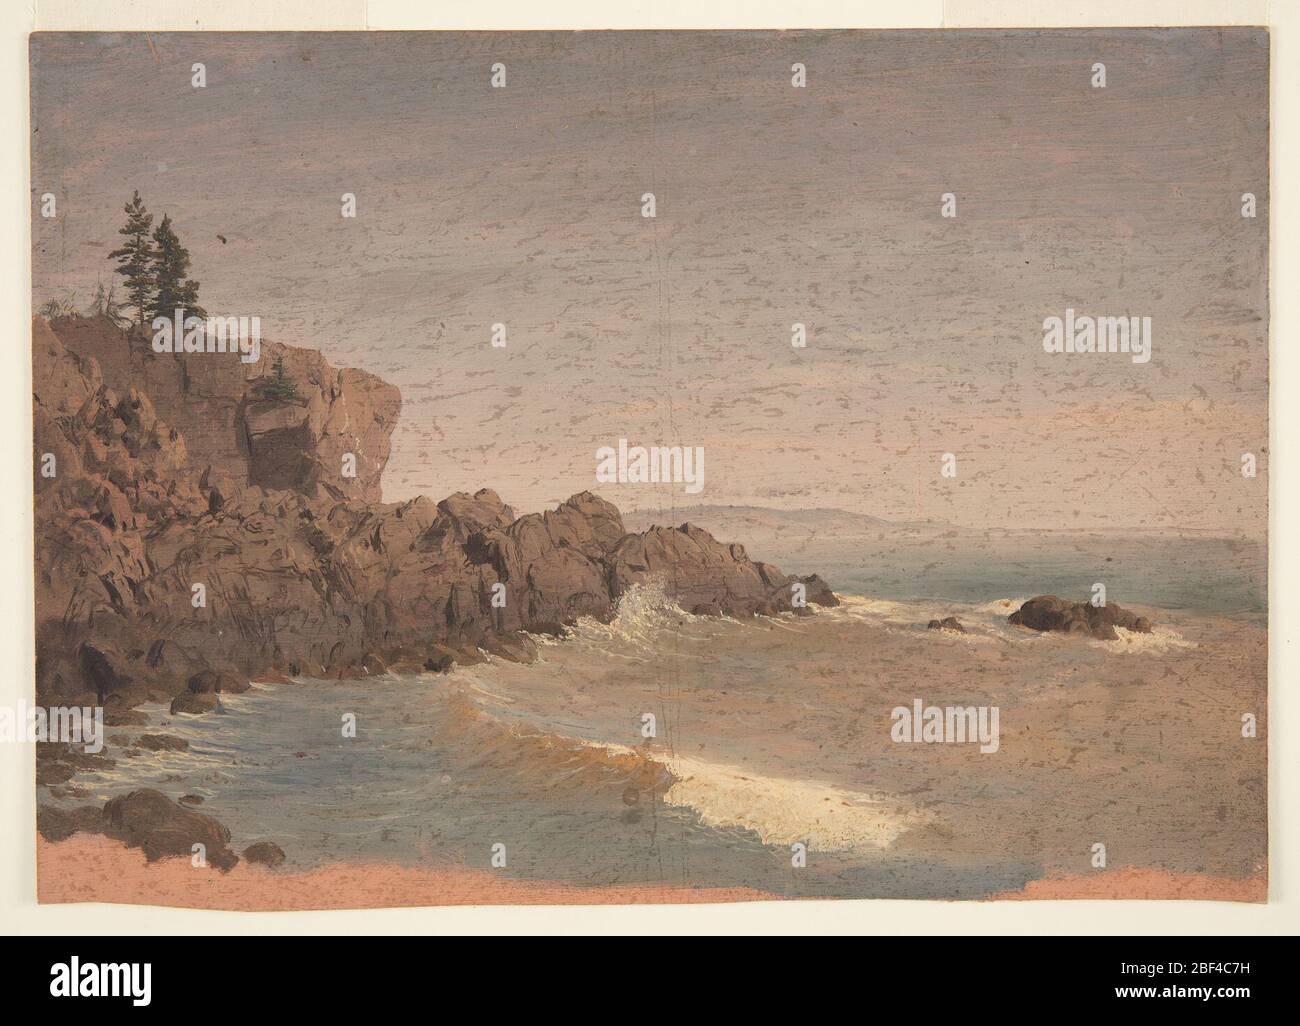 Grand Manan Island Canada. The coast protrudes in the left middle plane. A hilly coastline is shown in the right background. The dark orange ground color is shown at the bottom. Stock Photo